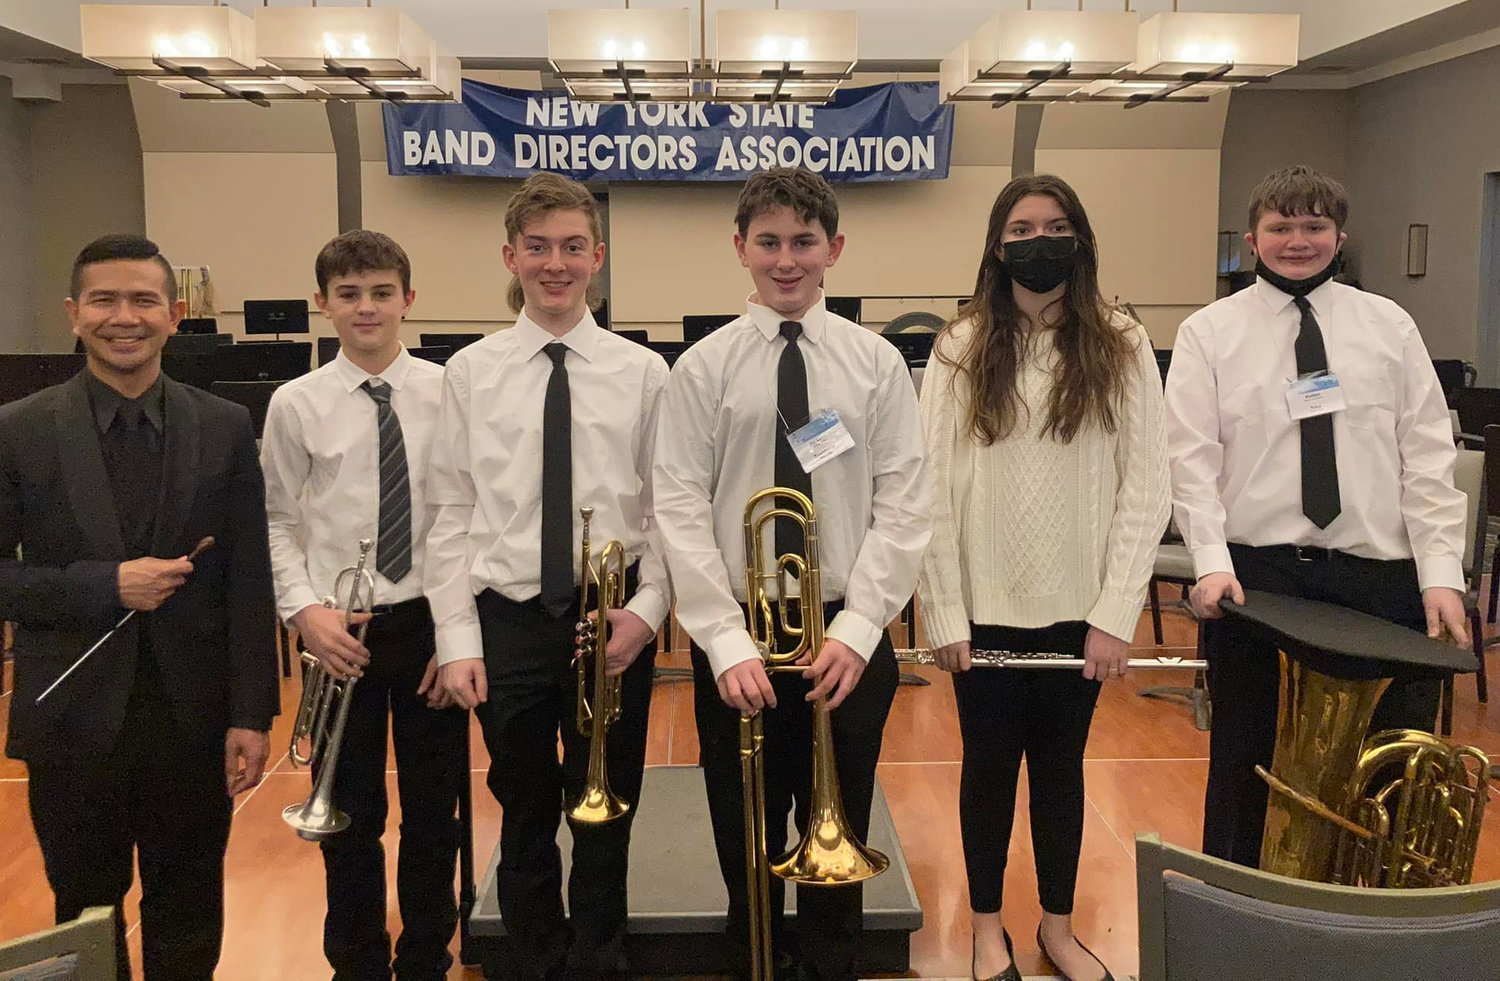 Pictured with NYSBDA Middle School Honors Band conductor Dr. Thomas Gamboa are
(left to right): Jack Meyer, Colin Smith, Jackson Seifert, Becky Neikens and Kolton Chamberlain